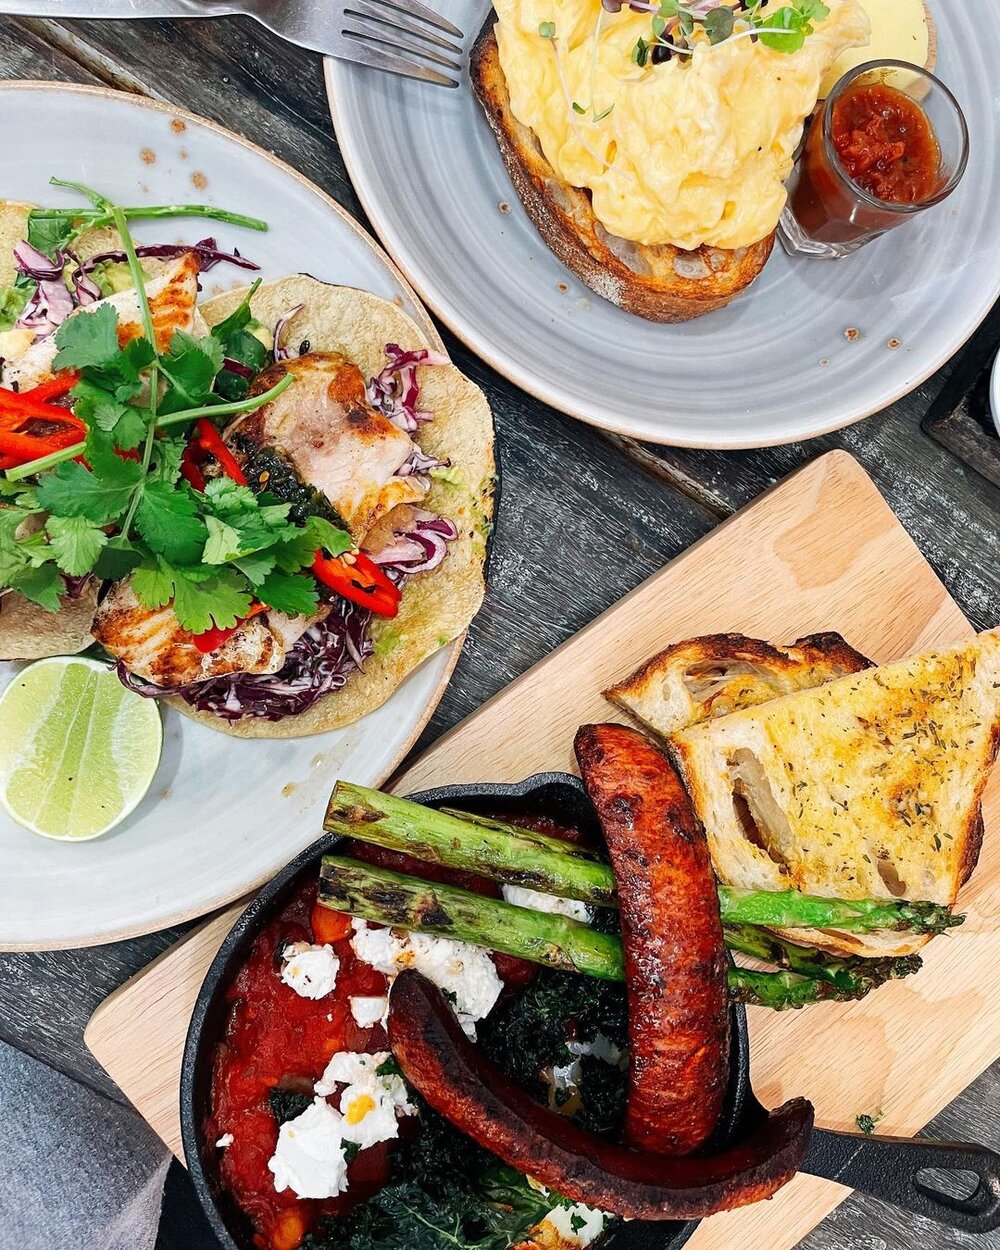  Commune Cafe Gold Coast. This guide to the best cafes in Gold Coast Australia includes the best breakfast spots in Gold Coast and the best vegan cafes in Gold Coast. Find the best cafes in Burleigh Head, Palm Beach, and more of the best places to ea